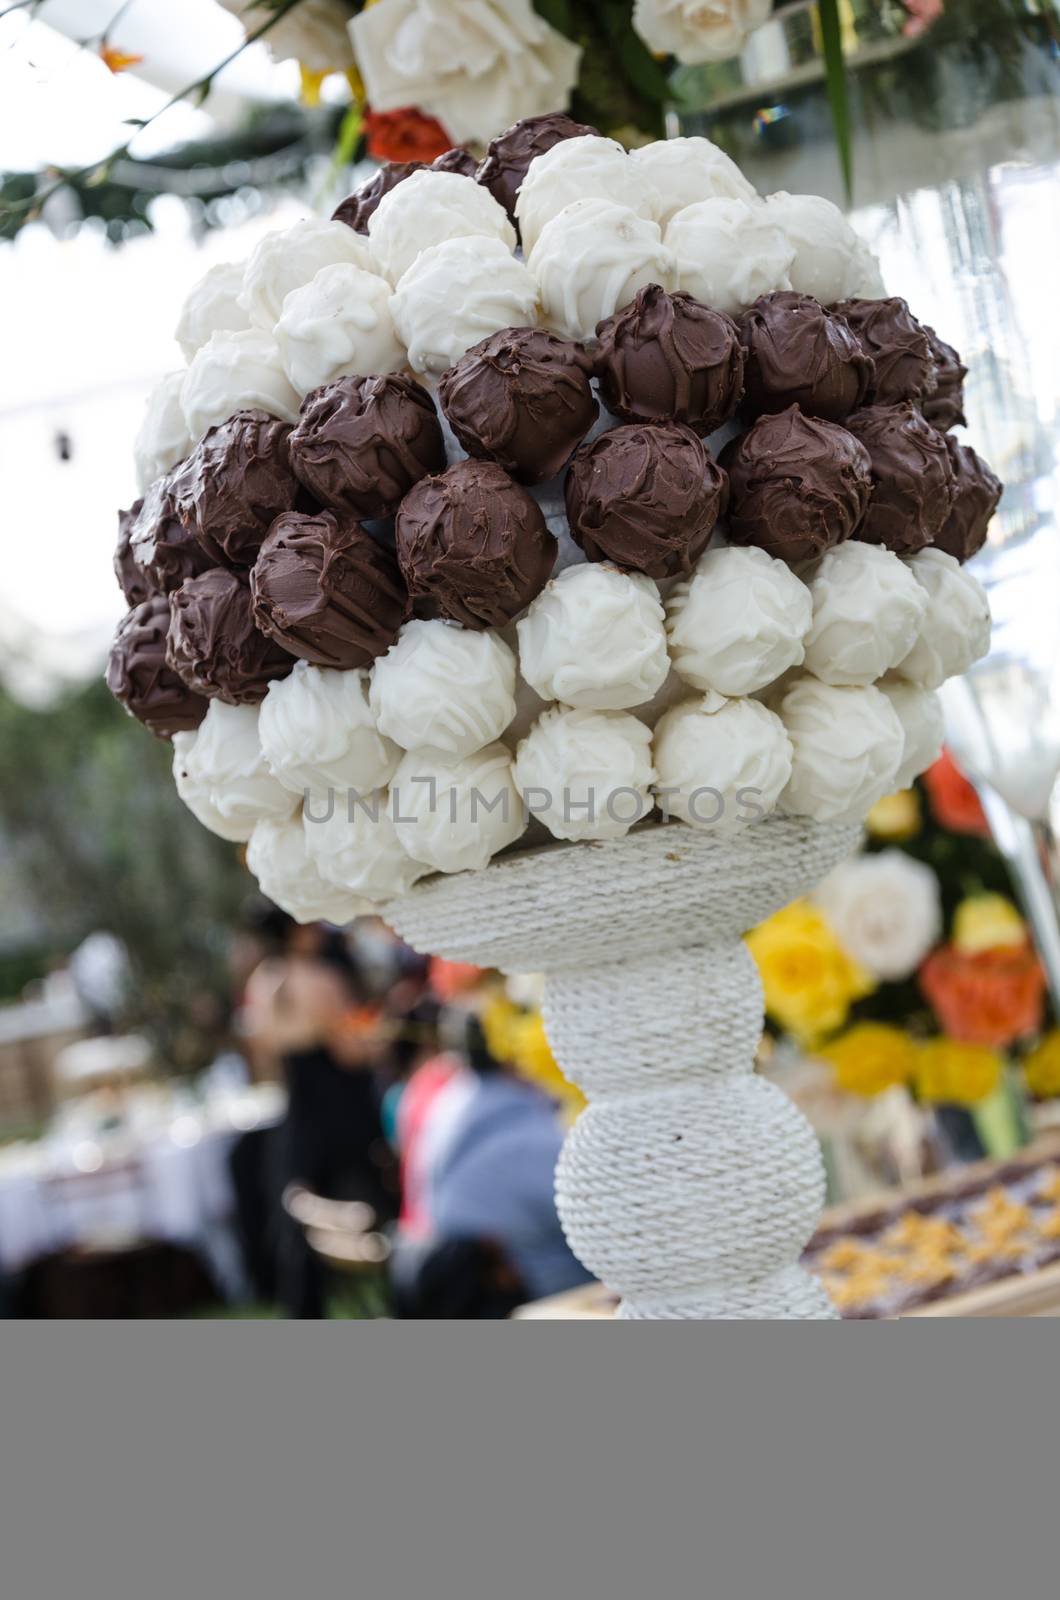 Decoration for weddings, sweet table